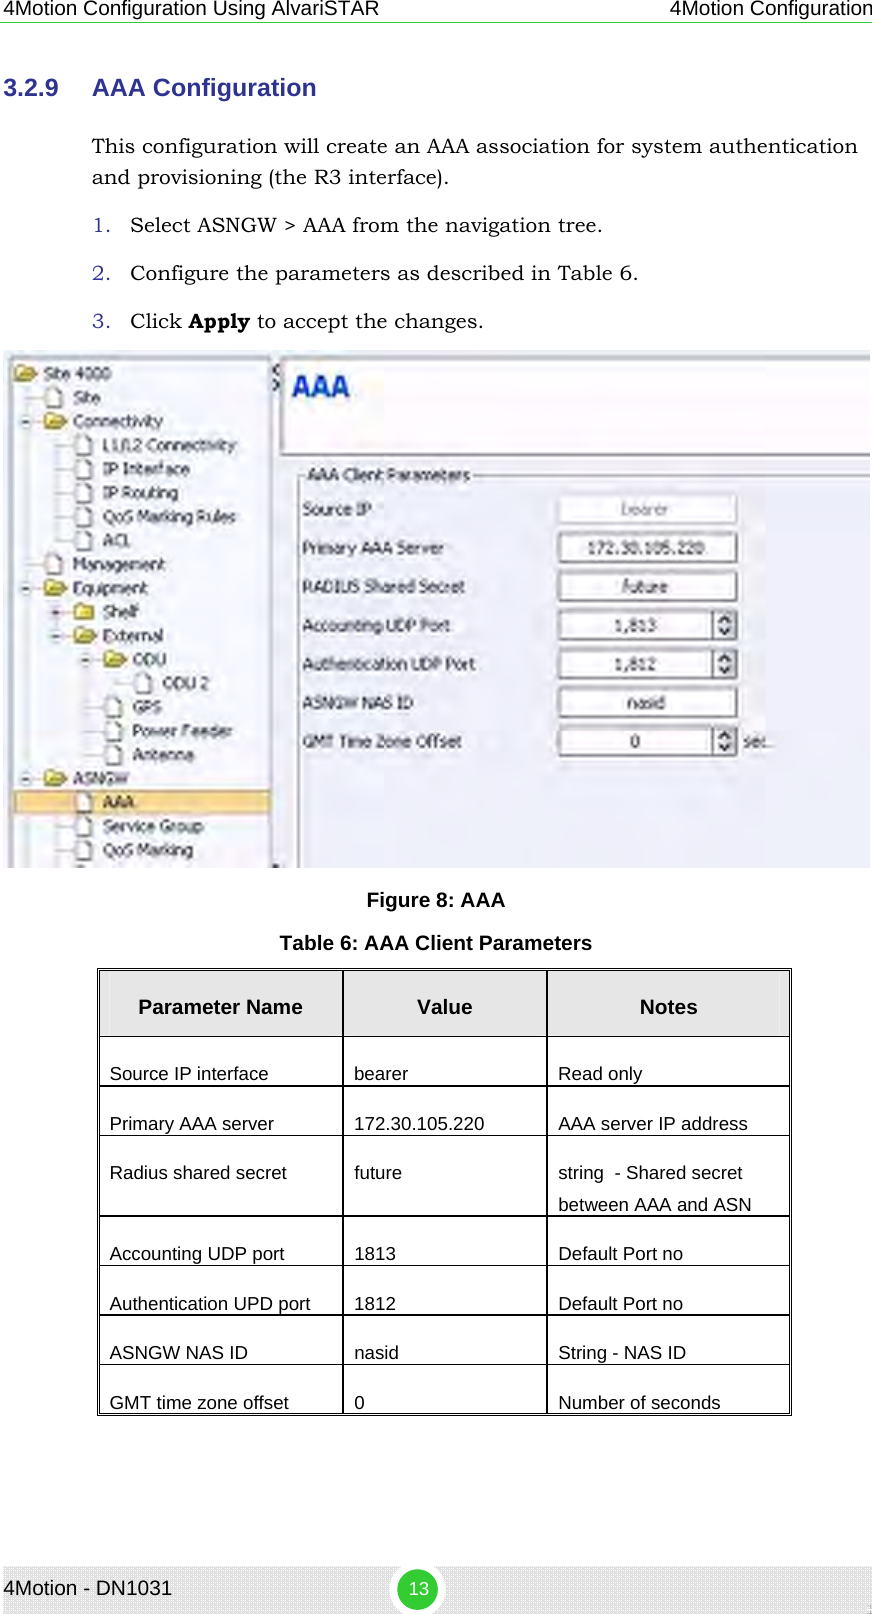 4Motion Configuration Using AlvariSTAR 4Motion Configuration 3.2.9  AAA Configuration This configuration will create an AAA association for system authentication and provisioning (the R3 interface). 1. Select ASNGW &gt; AAA from the navigation tree. 2. Configure the parameters as described in Table 6. 3. Click Apply to accept the changes.  Figure 8: AAA Table 6: AAA Client Parameters Parameter Name  Value  Notes Source IP interface  bearer  Read only Primary AAA server  172.30.105.220  AAA server IP address Radius shared secret  future  string  - Shared secret between AAA and ASN Accounting UDP port  1813  Default Port no Authentication UPD port  1812  Default Port no ASNGW NAS ID  nasid  String - NAS ID GMT time zone offset  0  Number of seconds 4Motion - DN1031  13 